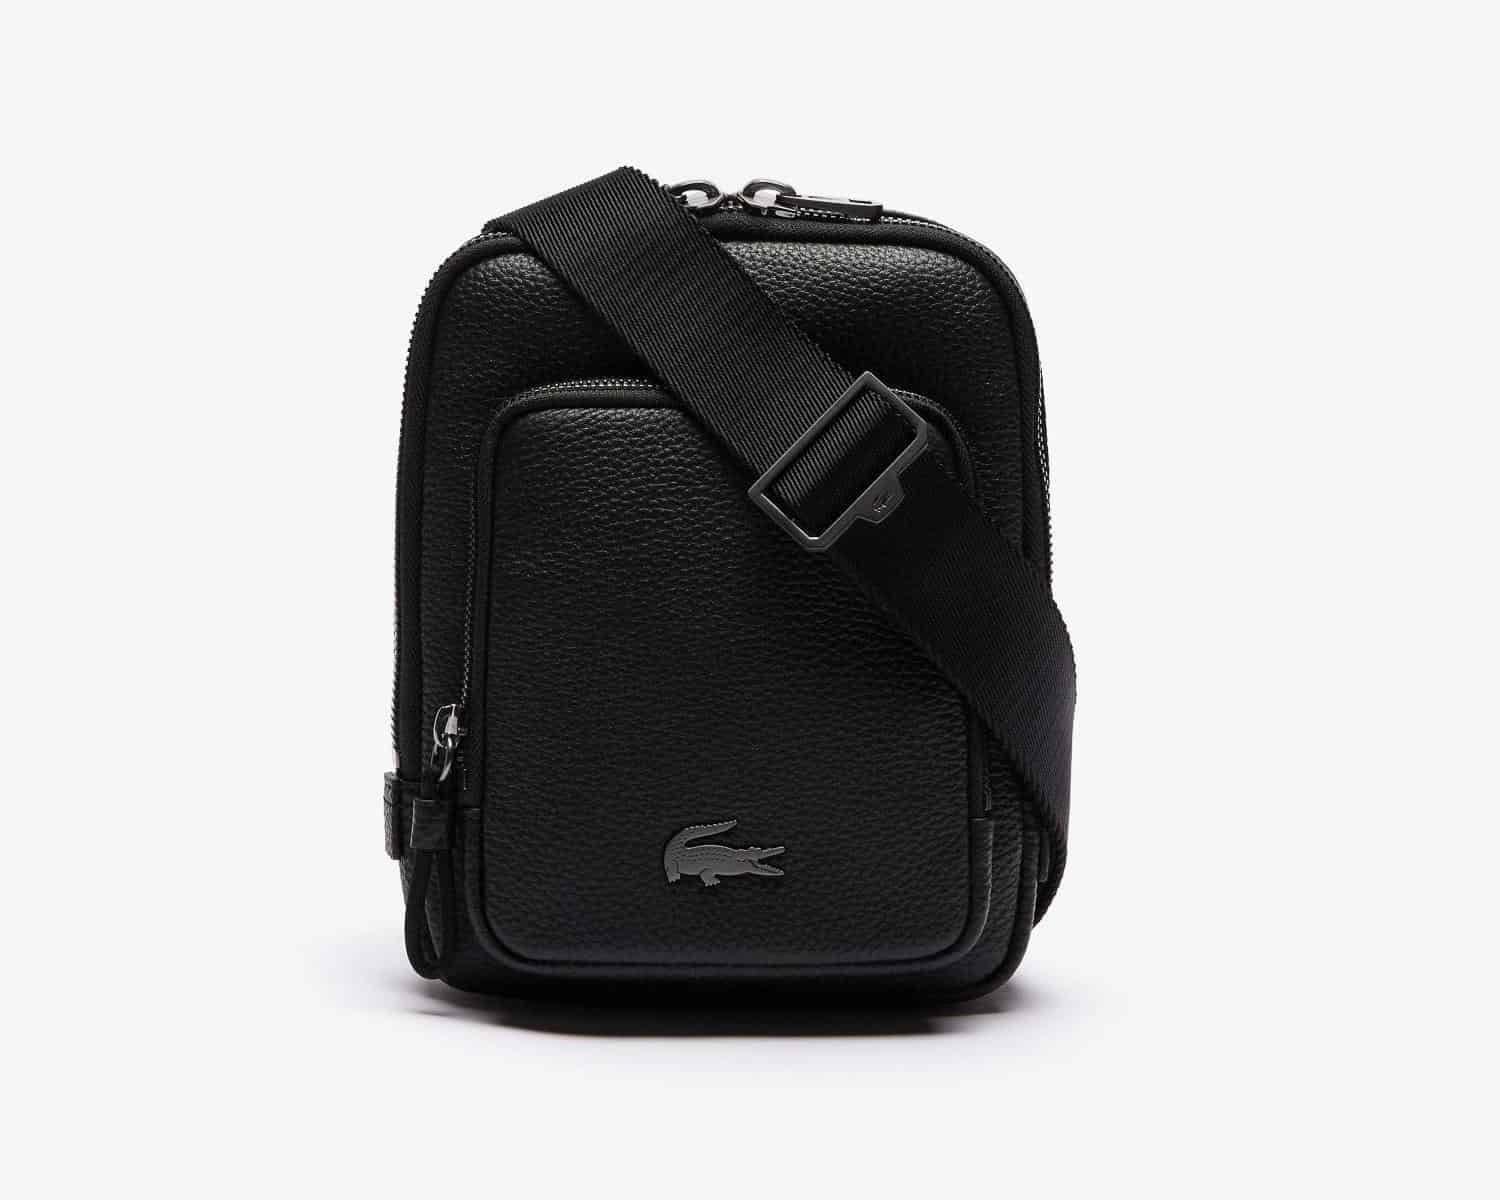 Lacoste Genuine Leather Small Flat Crossbody Bag